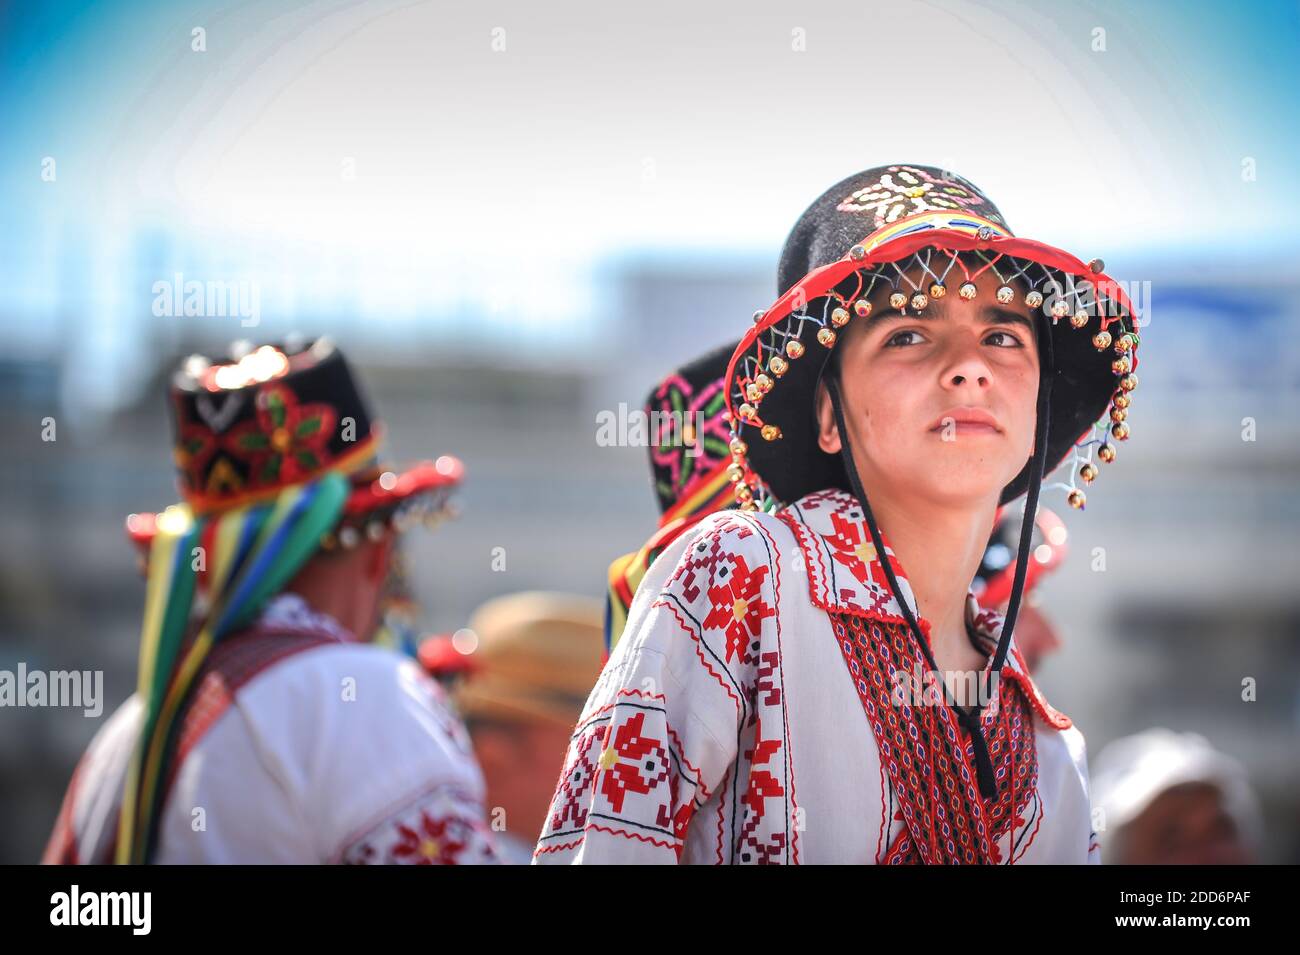 Bucharest, Romania - May 9, 2010: Portrait of a young boy dressed in a  traditional costume of the Romanian ancient dancers Calusarii Stock Photo -  Alamy